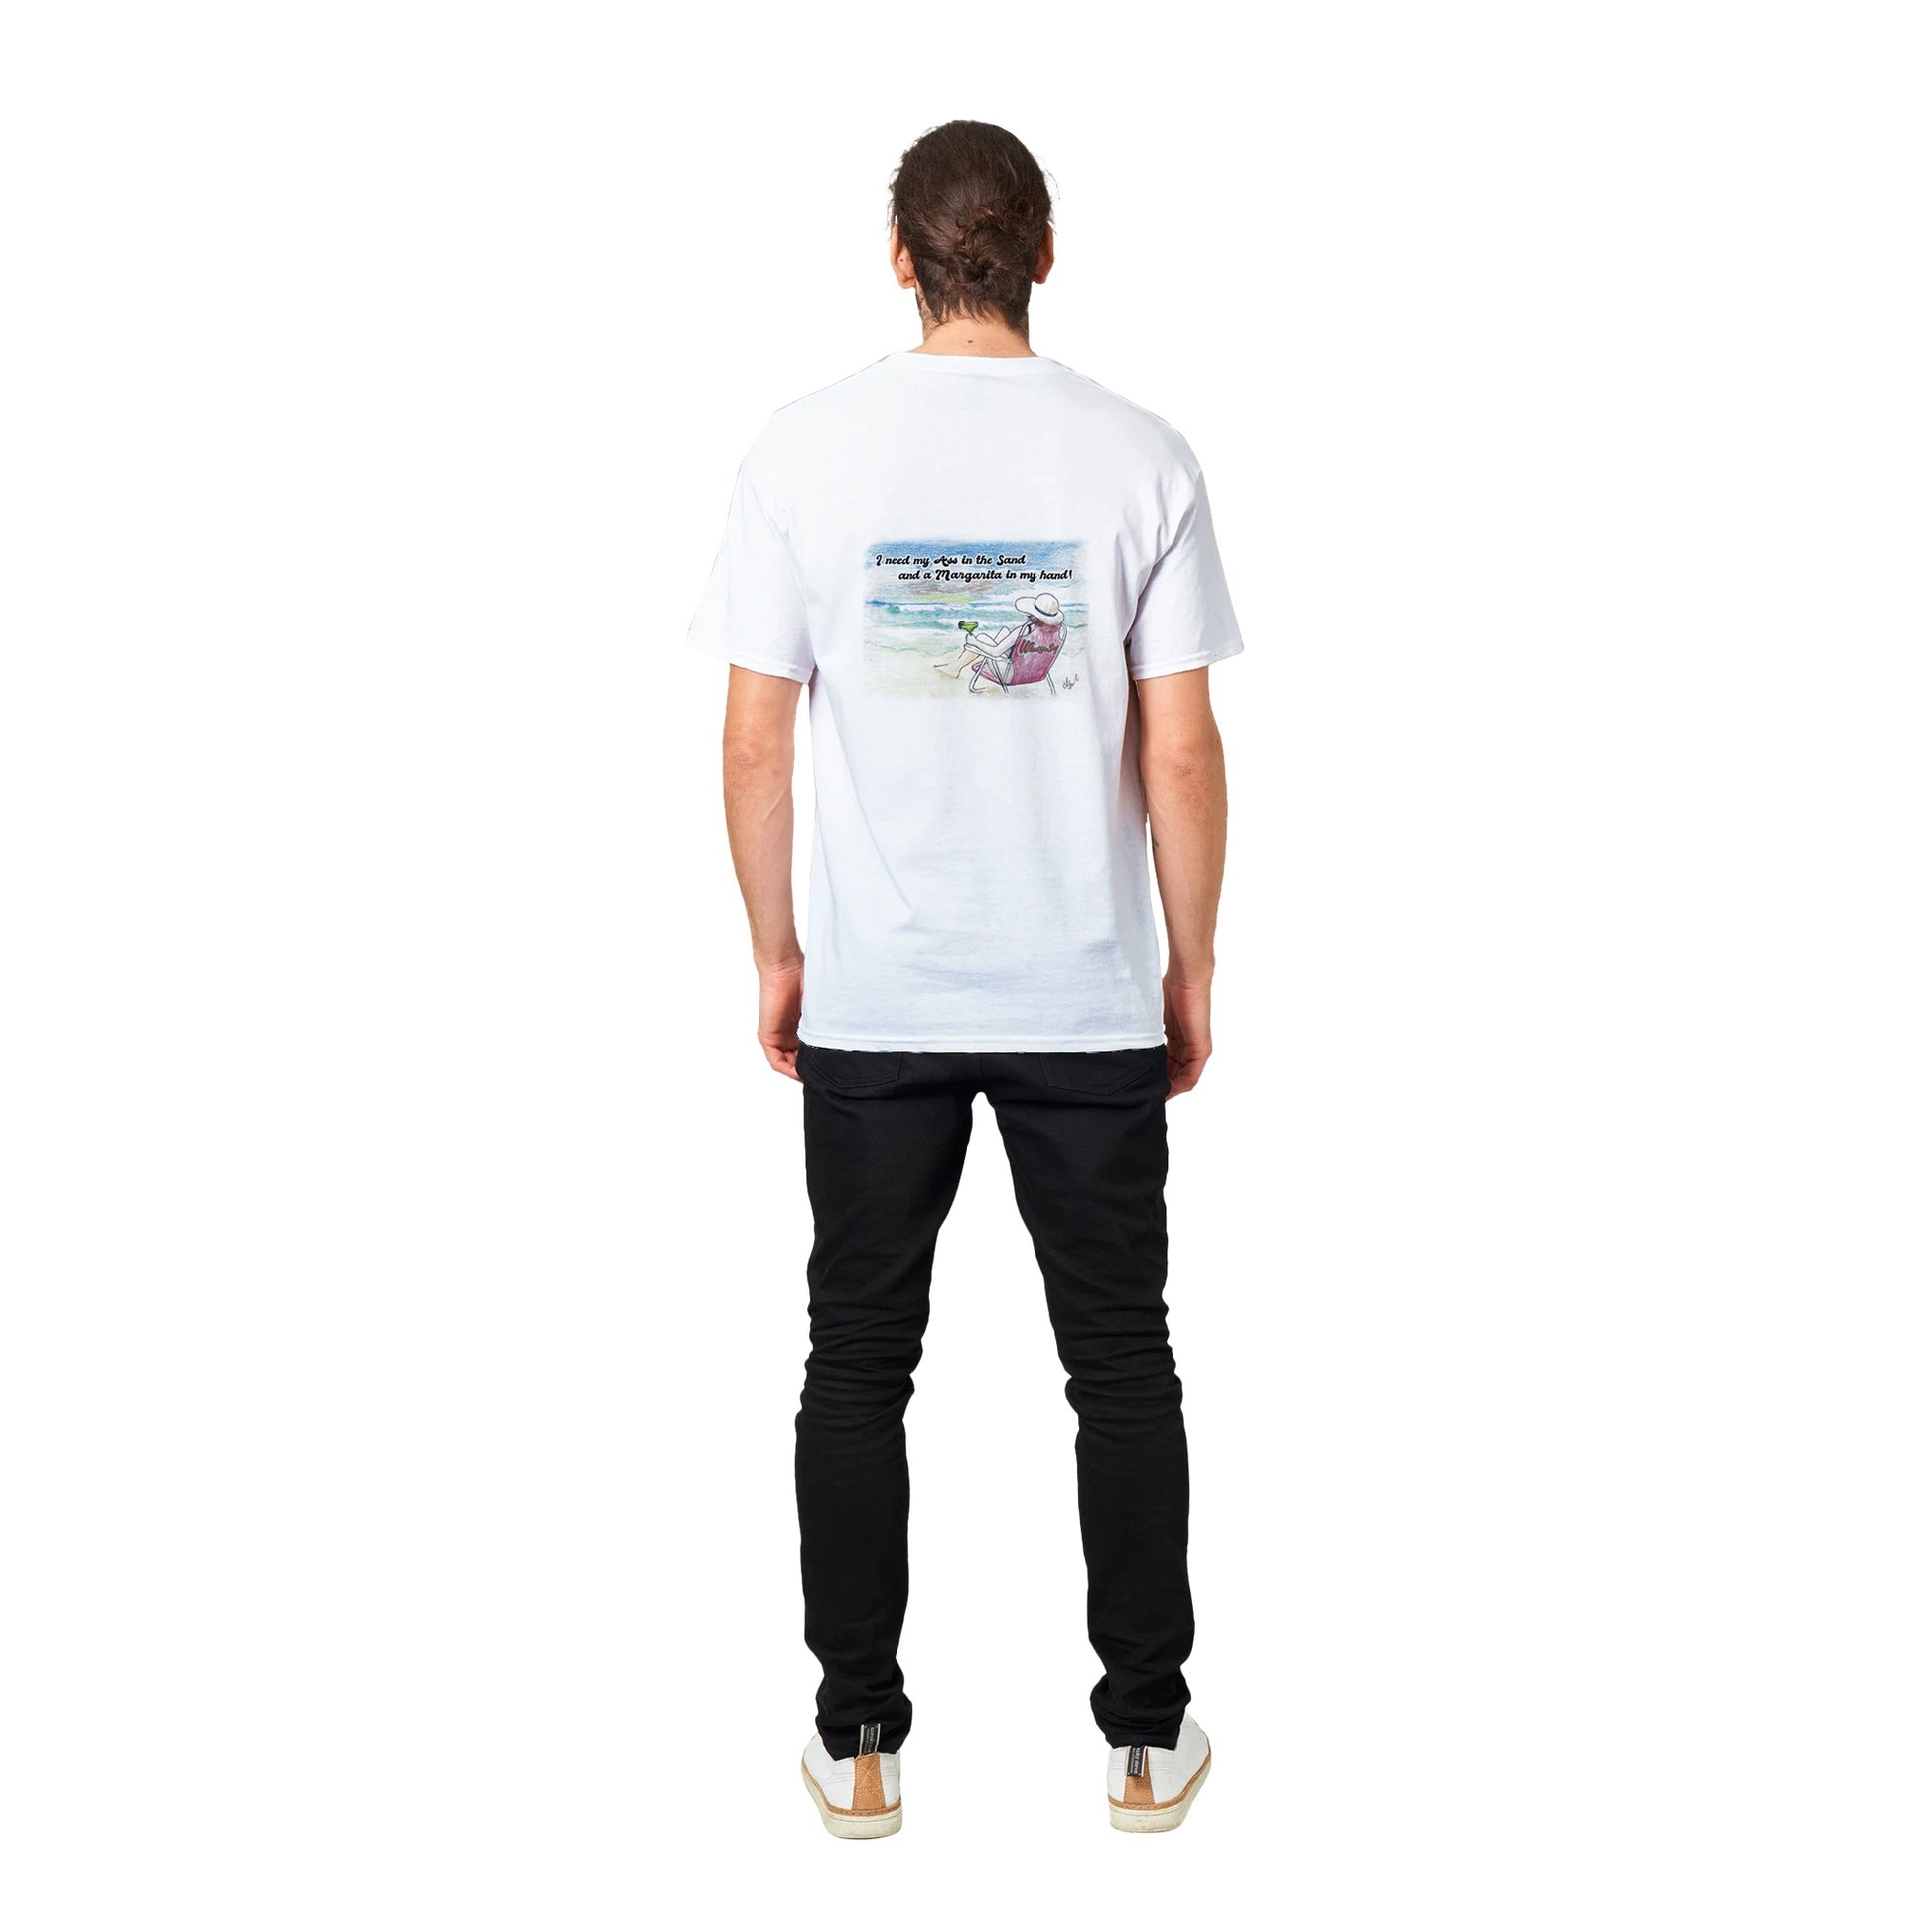 A white heavyweight Unisex Crewneck t-shirt with original artwork and I need my Ass in the Sand and a Margarita in my hand on back with WhatYa Say logo on front from WhatYa Say apparel worn by short brown-haired male model standing facing rear.